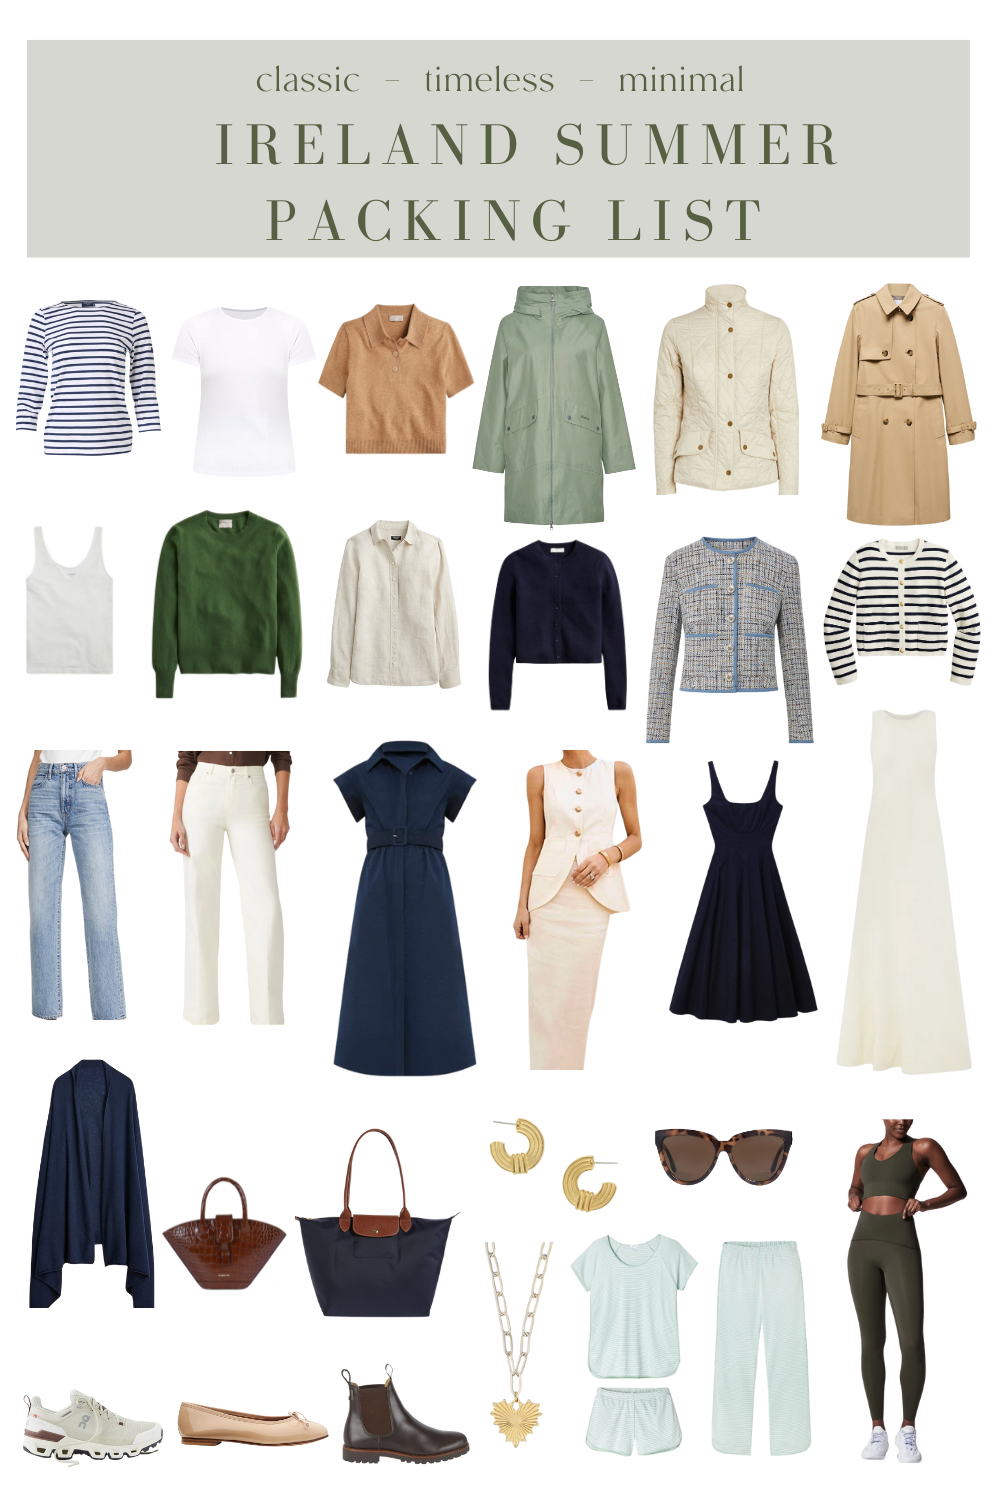 Ireland packing list, Ireland clothes packing, summer packing list for Ireland